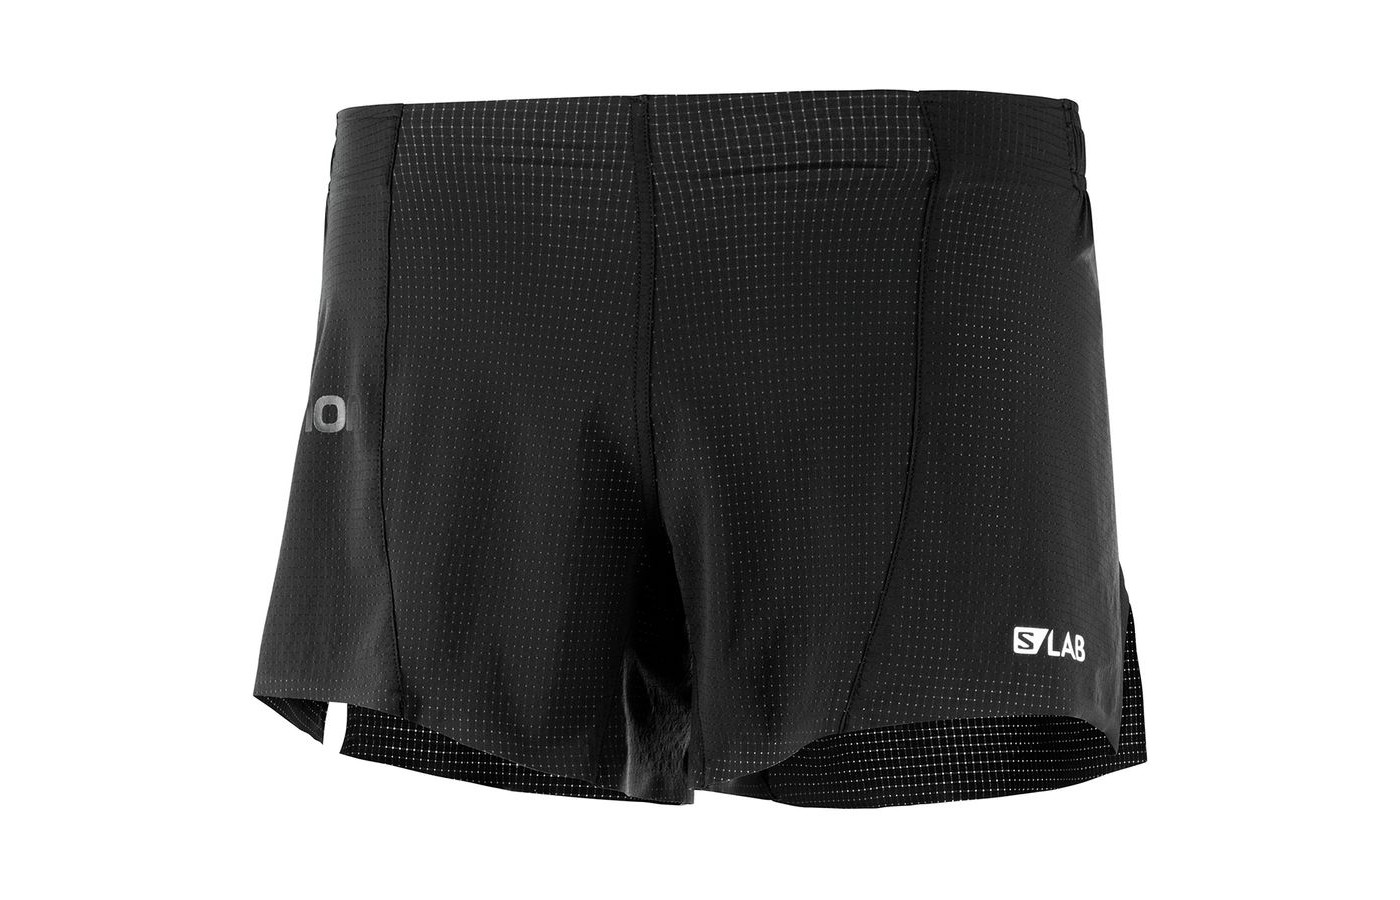 The Aerotech material of these S Lab shorts is even visible to the naked eye.